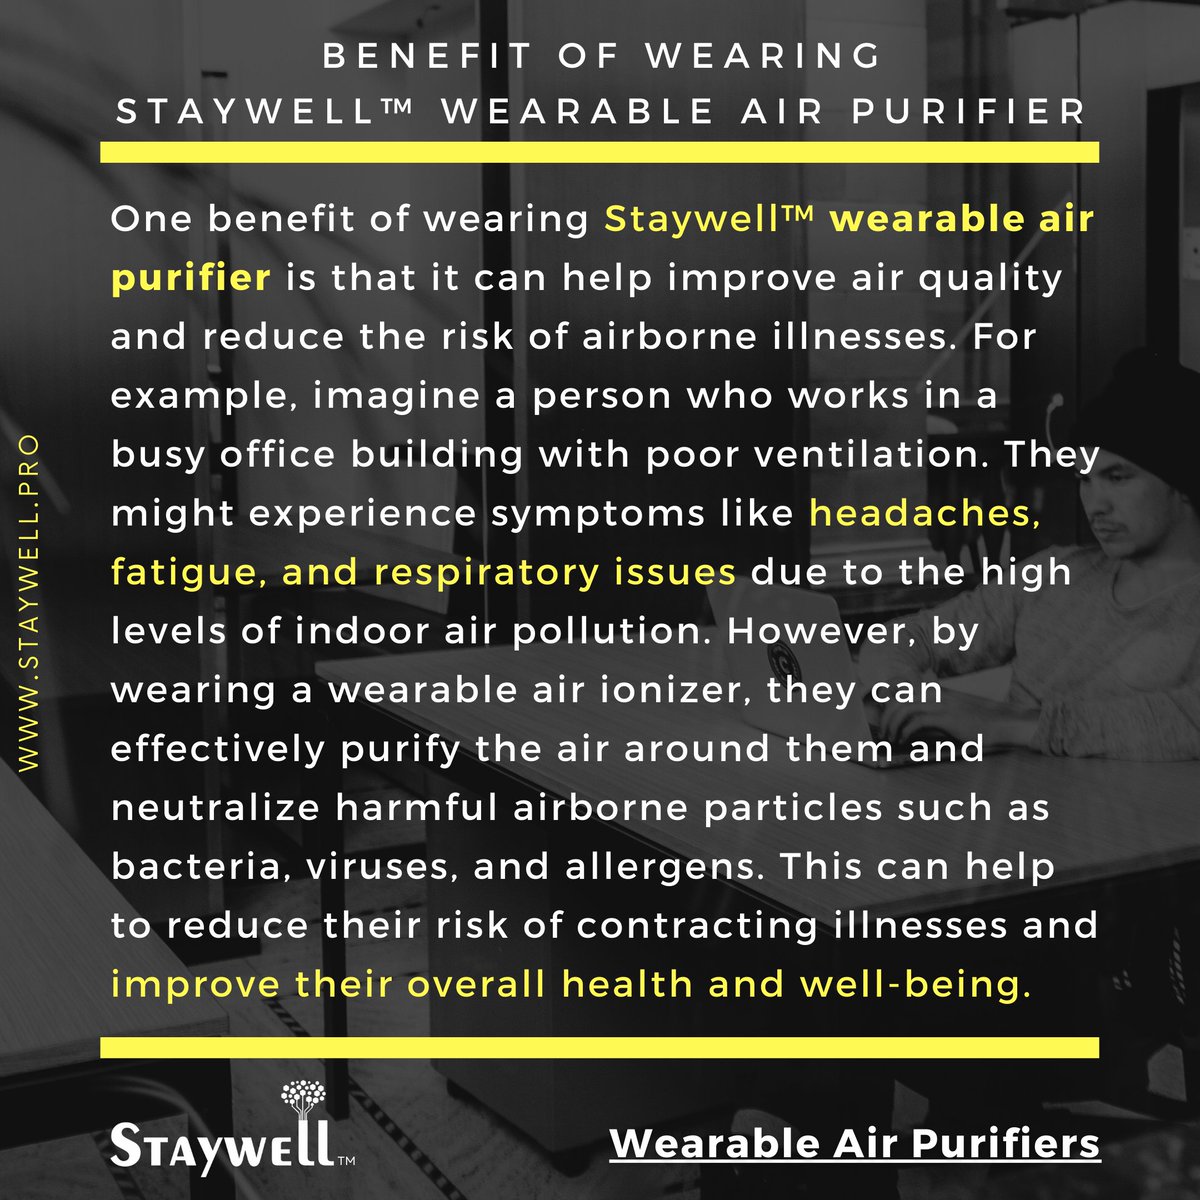 benefit of wearing
Staywell™ wearable air purifier
#Staywell #WearableAirPurifier
#CleanAirOnTheGo #AirYouCanWear 
#BreatheEasy #HealthyHabits
#AirPurification #AirQuality
#PollutionSolution #CleanAirEverywhere
#FreshAir #AirQualityControl
staywell.pro